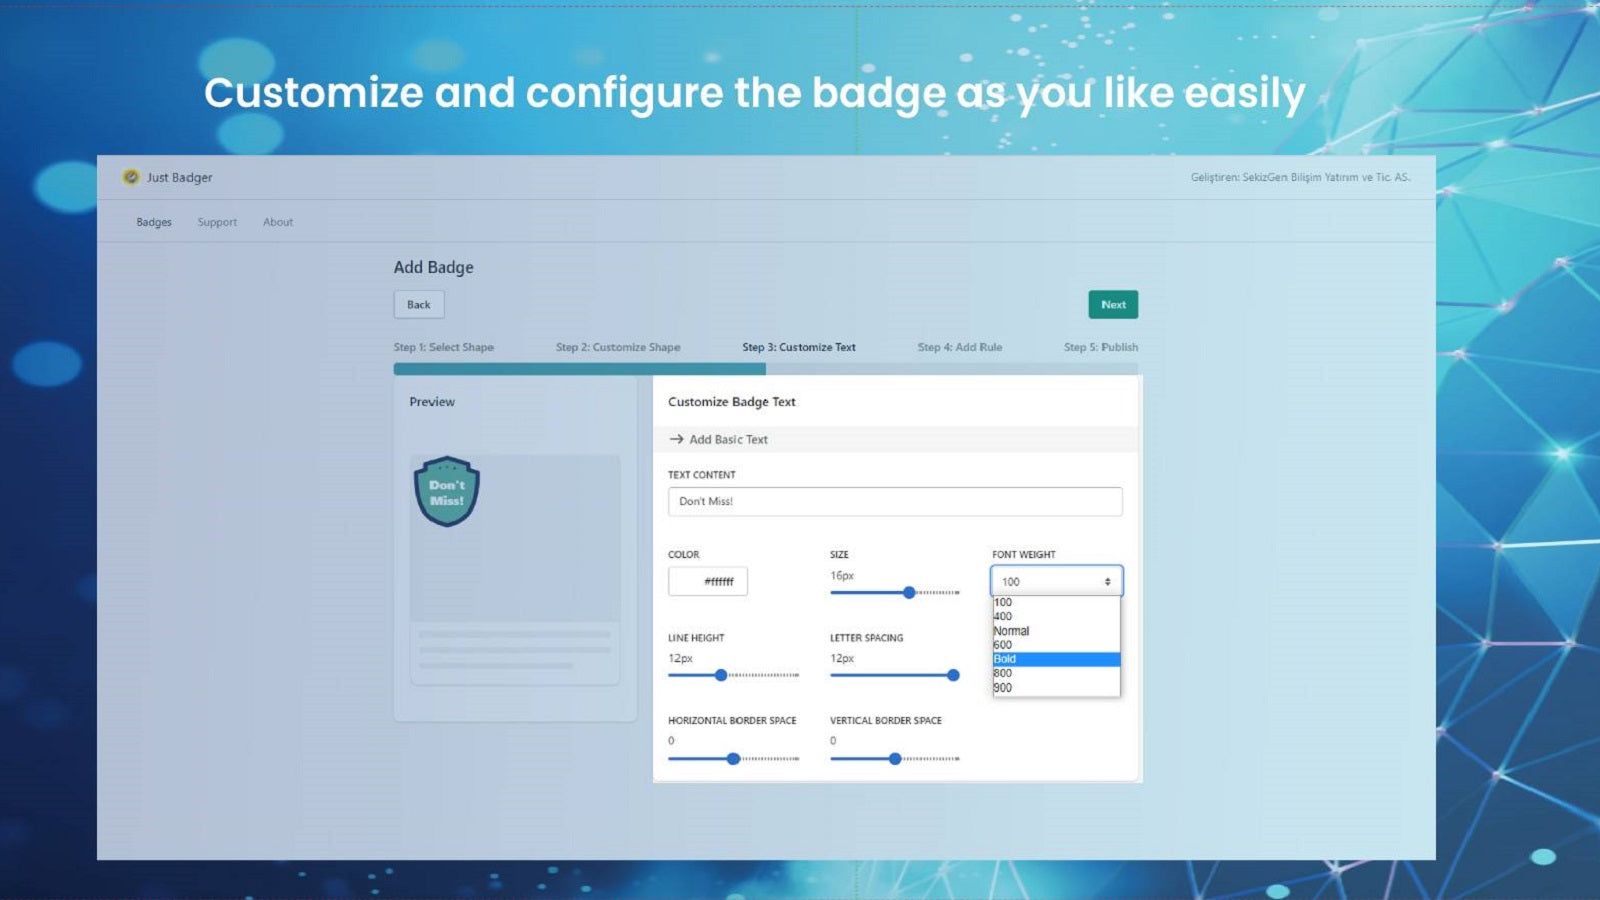 Customize and configure the badge as you like easily